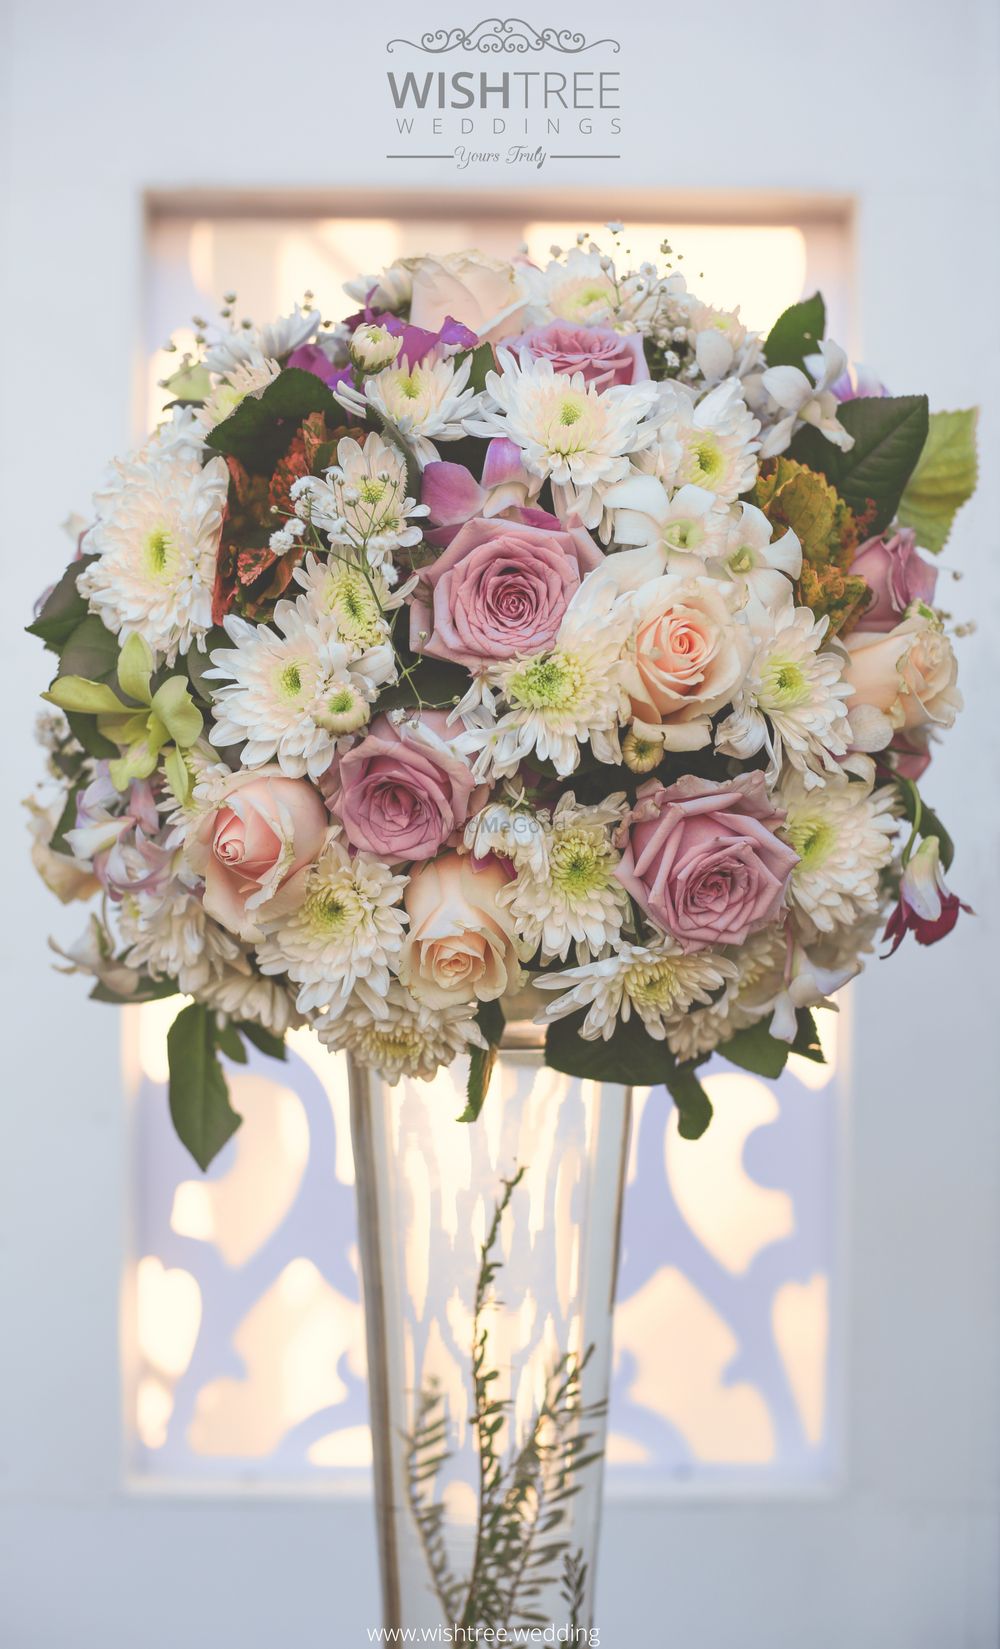 Photo of Floral vase centerpiece with white and pink flowers